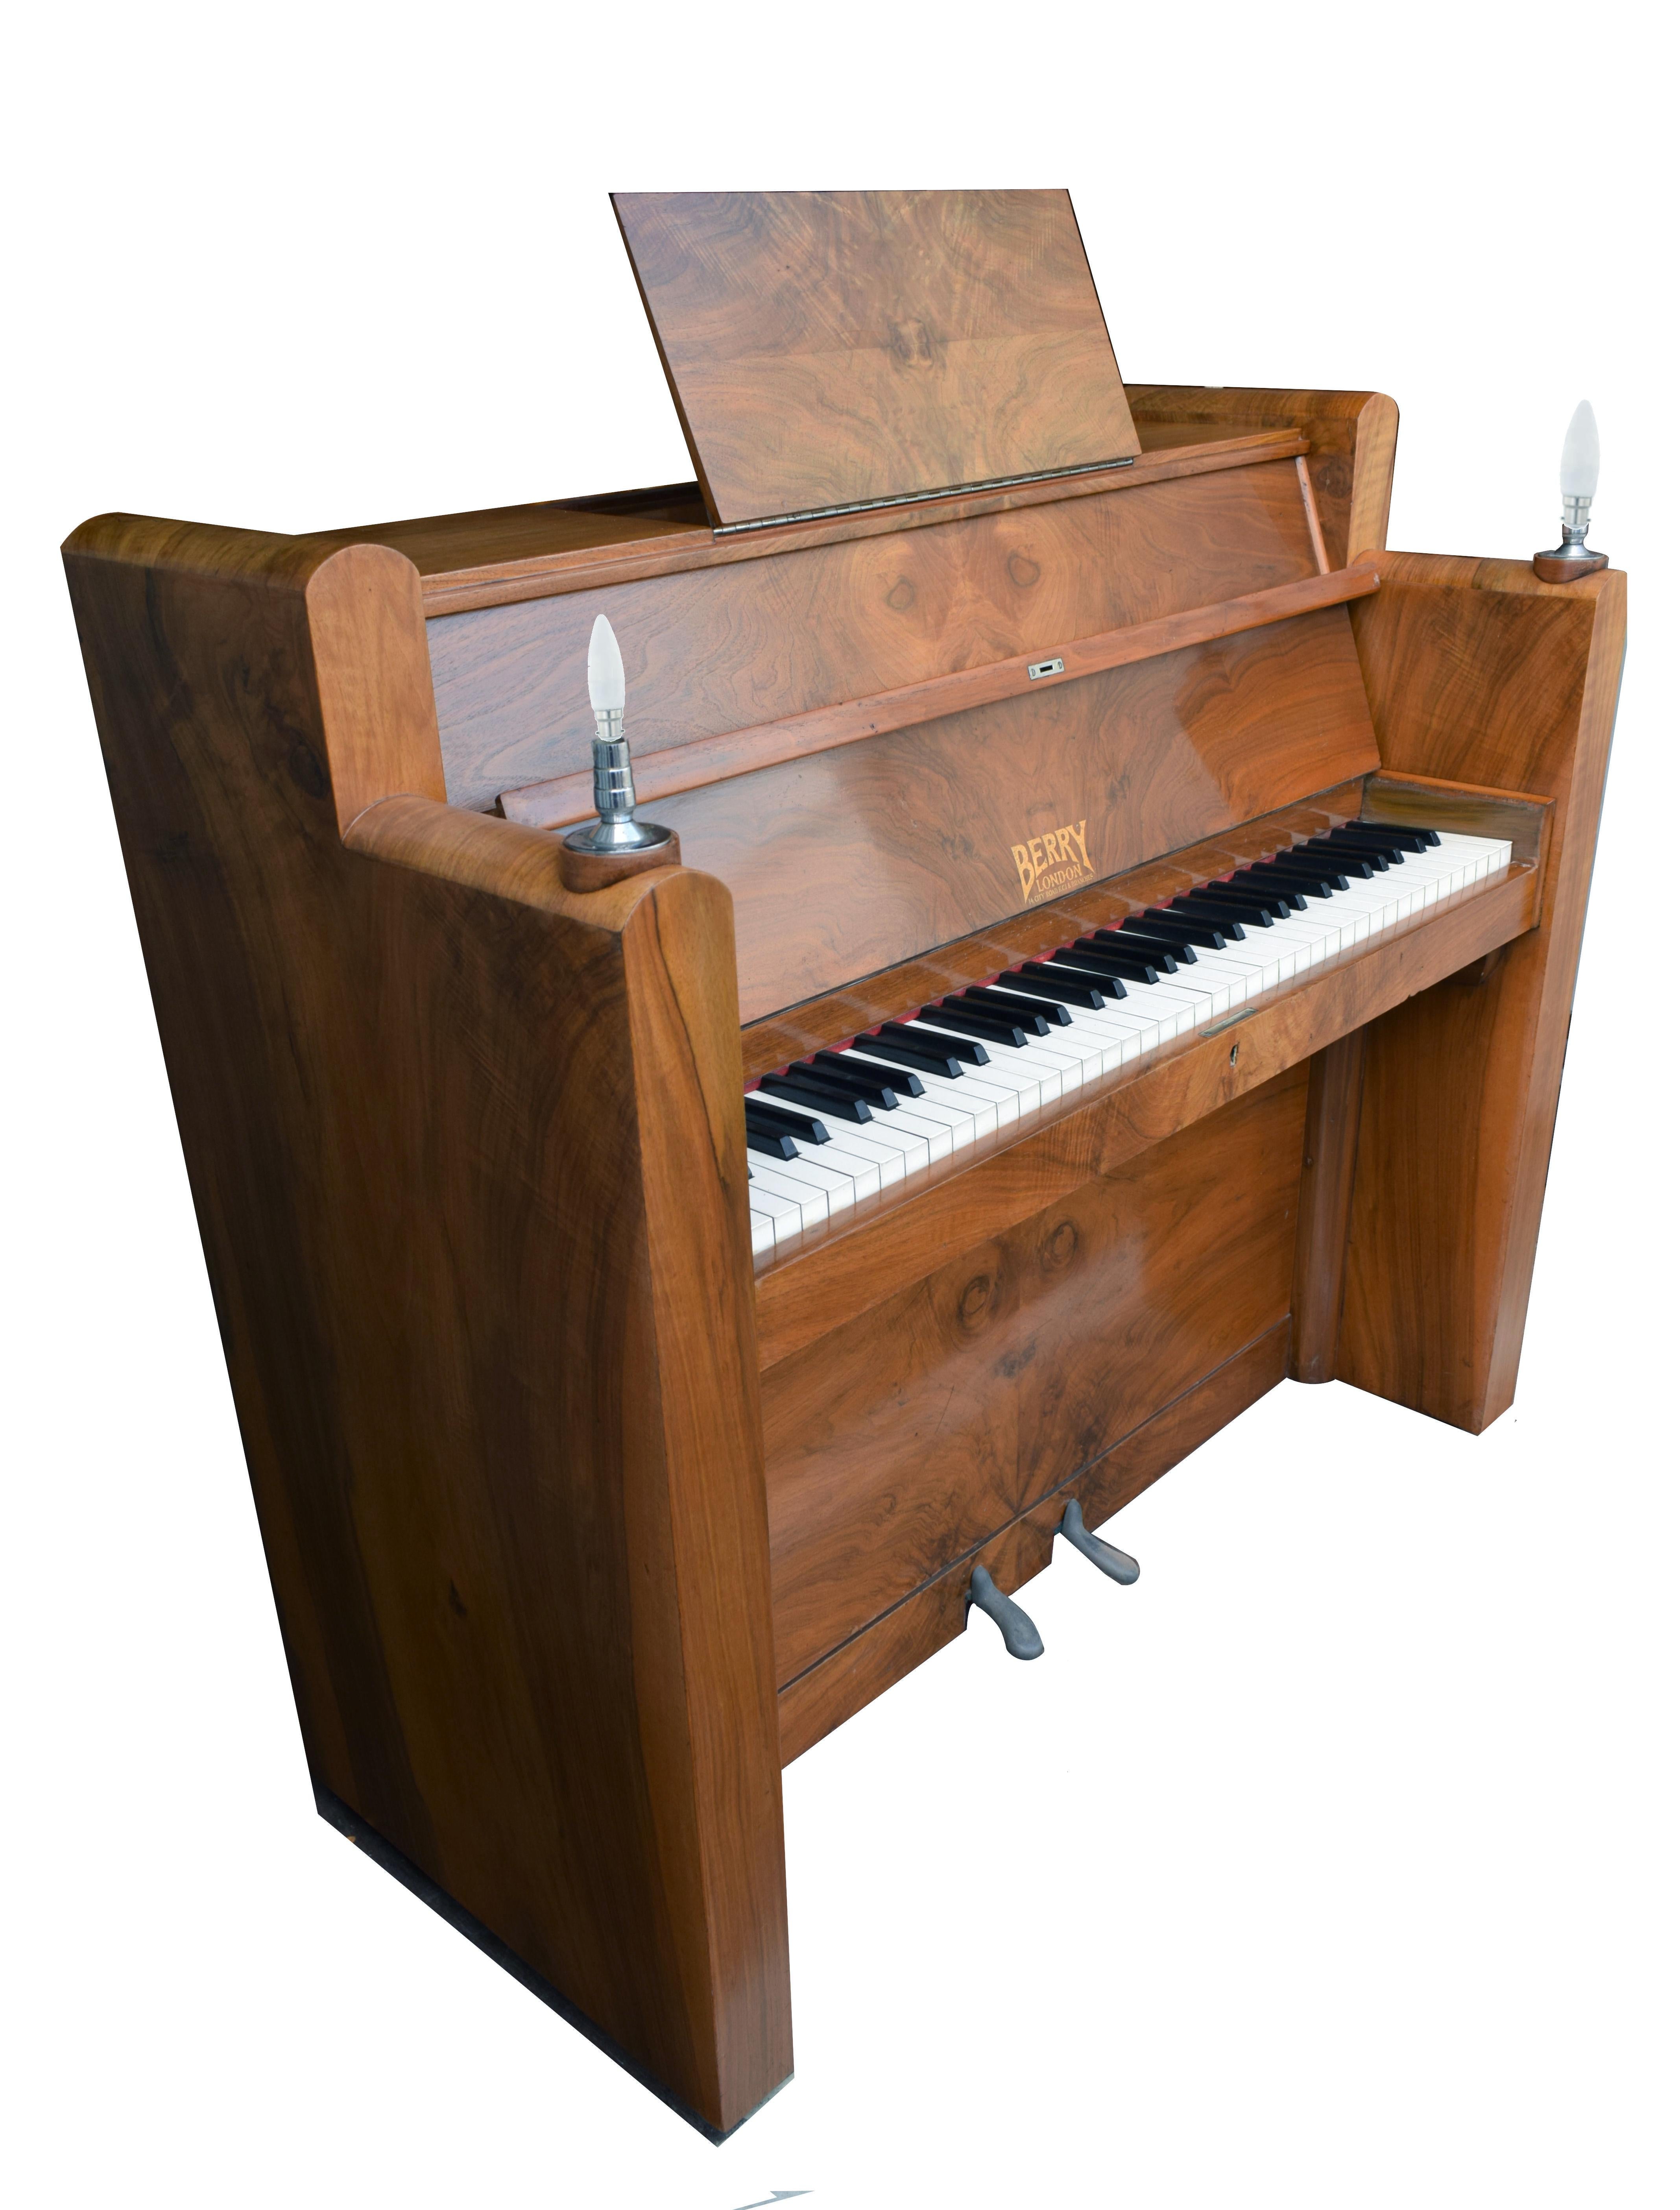 English 1930s Upright Art Deco Piano by Berry of London